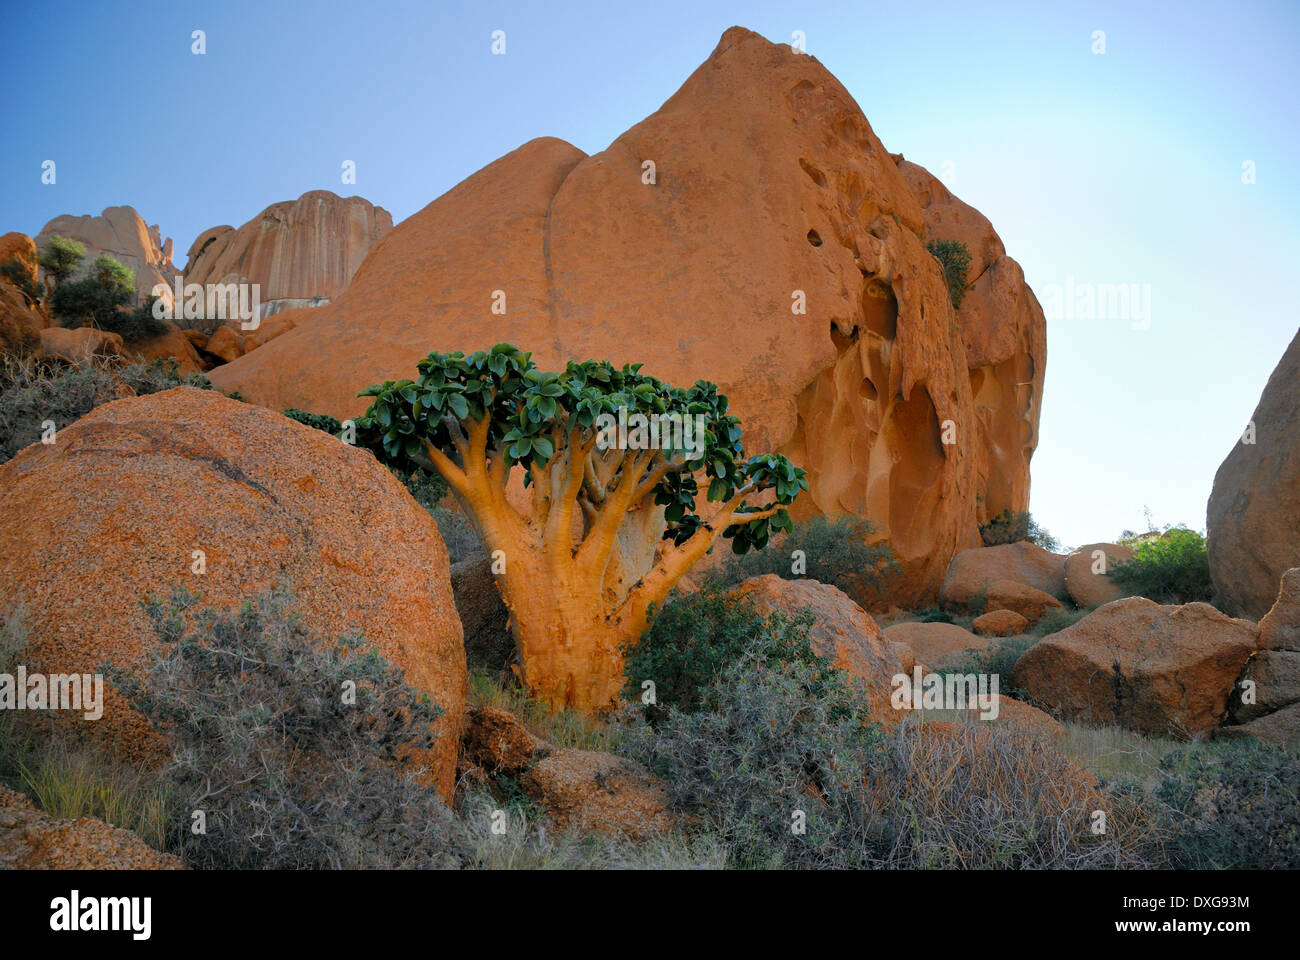 Succulent Cyphostemma currori plant growing at Spitzkoppe, Namibia Stock Photo